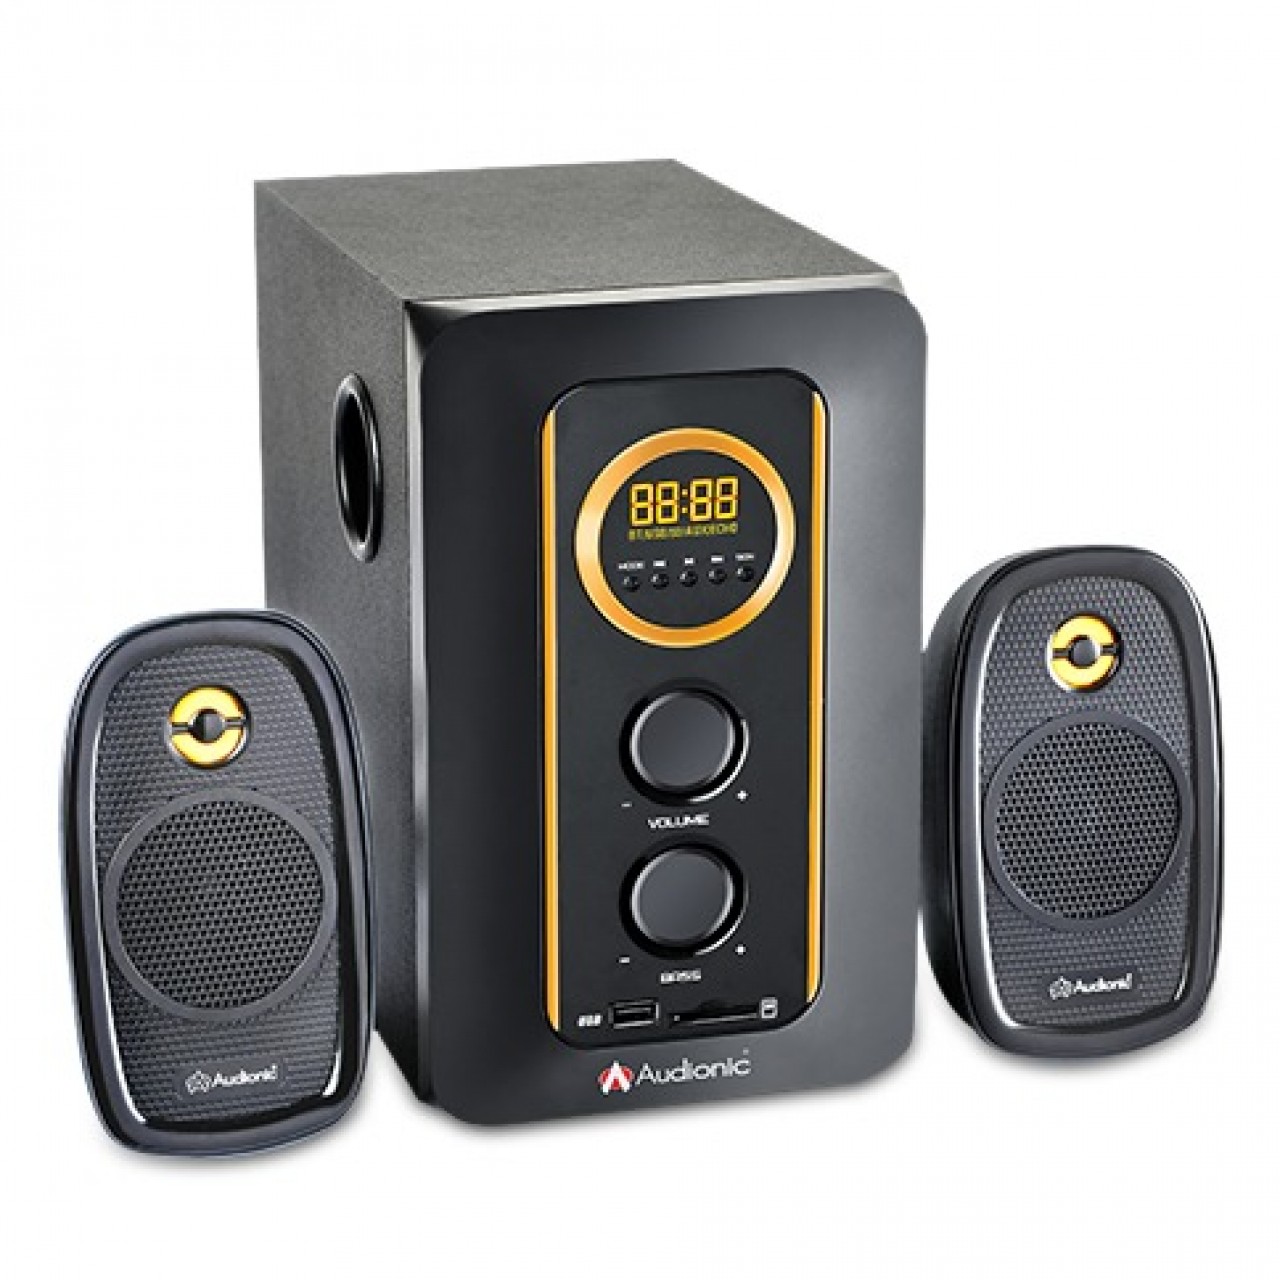 Audionic AD-3500 Wireless Bluetooth Speakers With LED Display